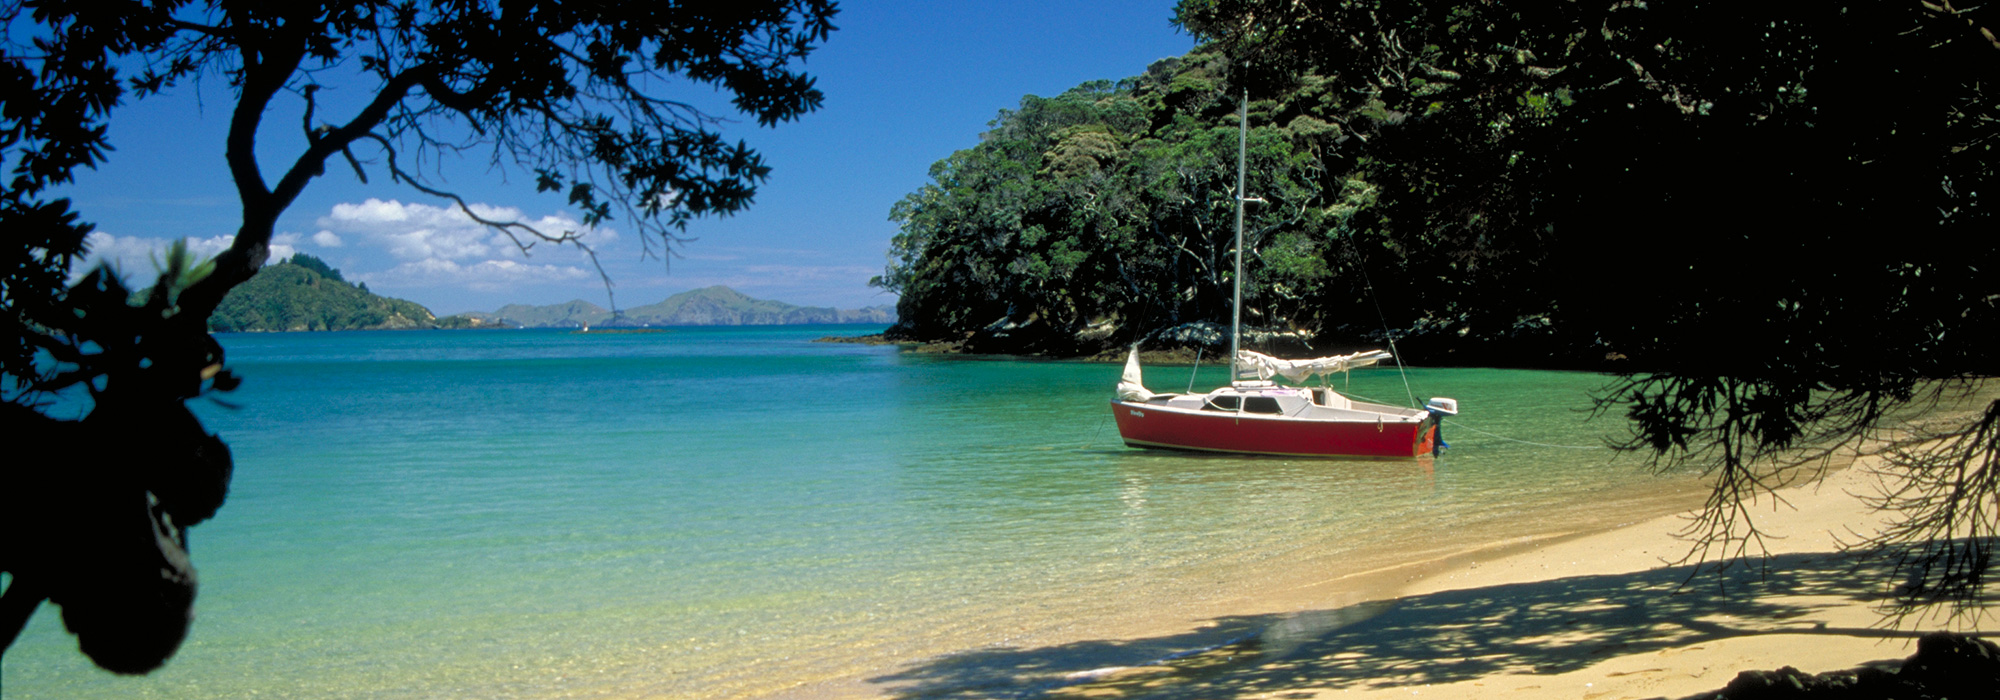 ABC Shuttle Service is the easiest and most cost effective airport transfer, private hire and tour option in New Zealand's beautiful Bay of Islands.